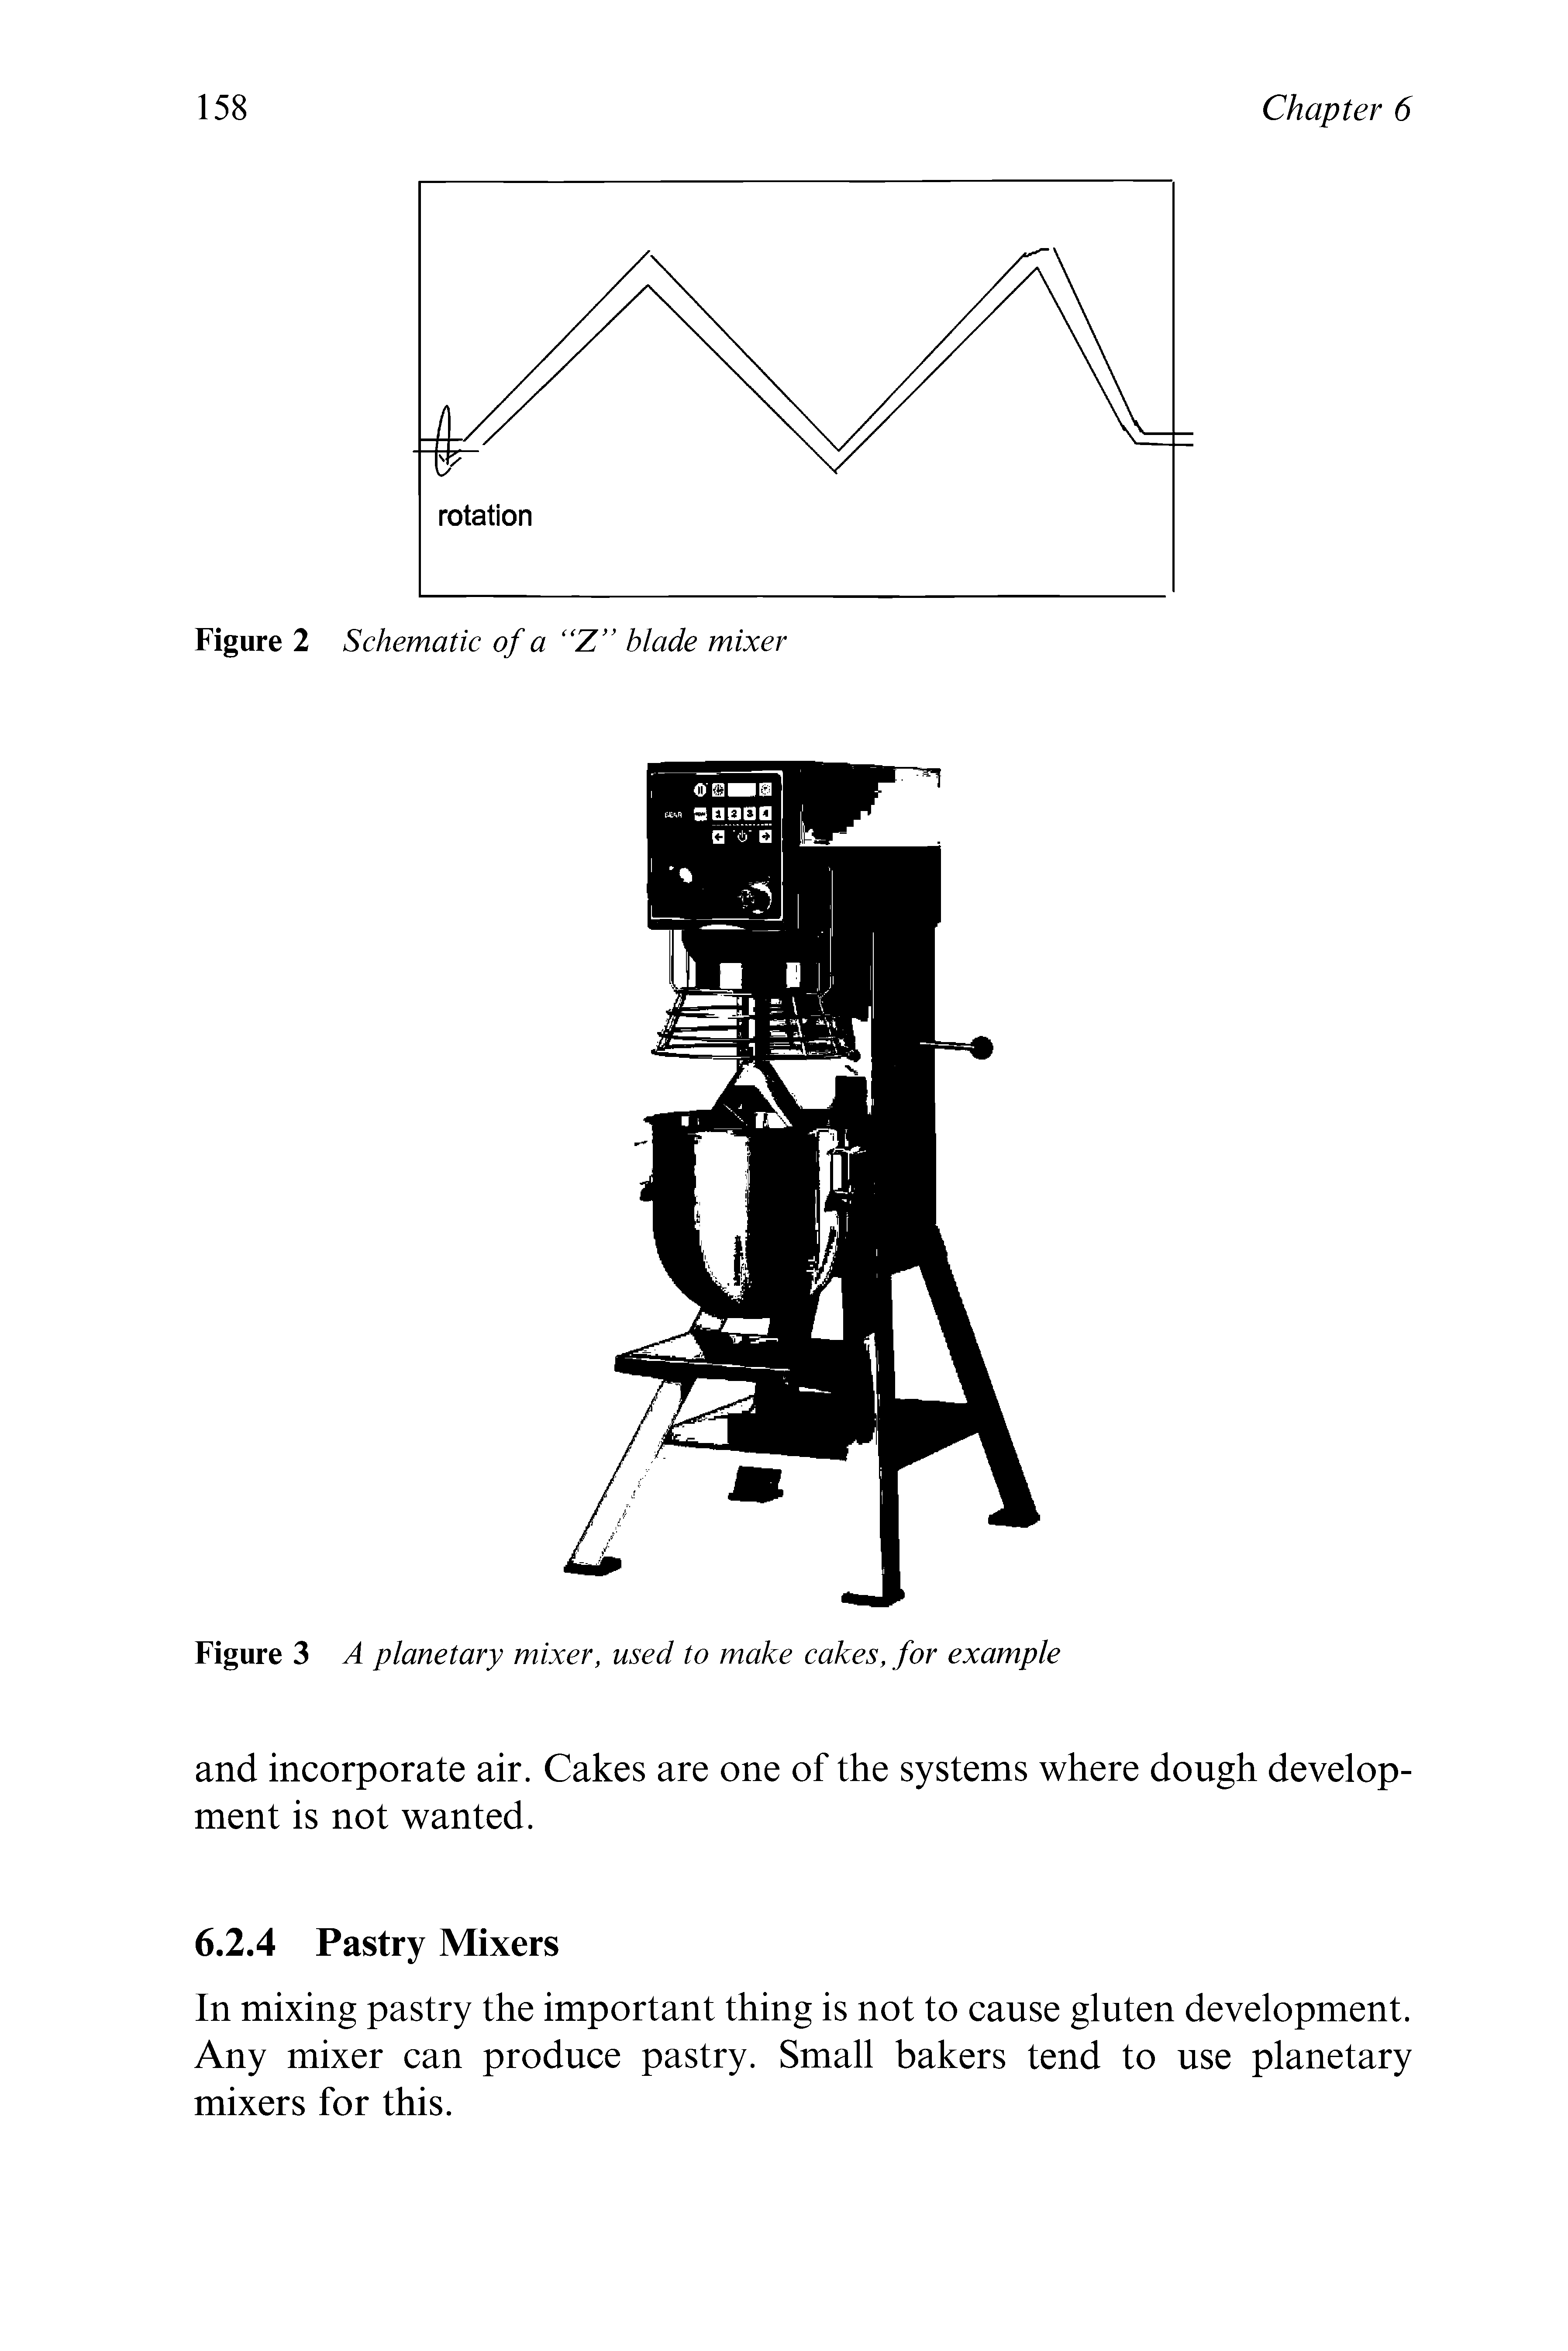 Figure 3 A planetary mixer, used to make cakes, for example...